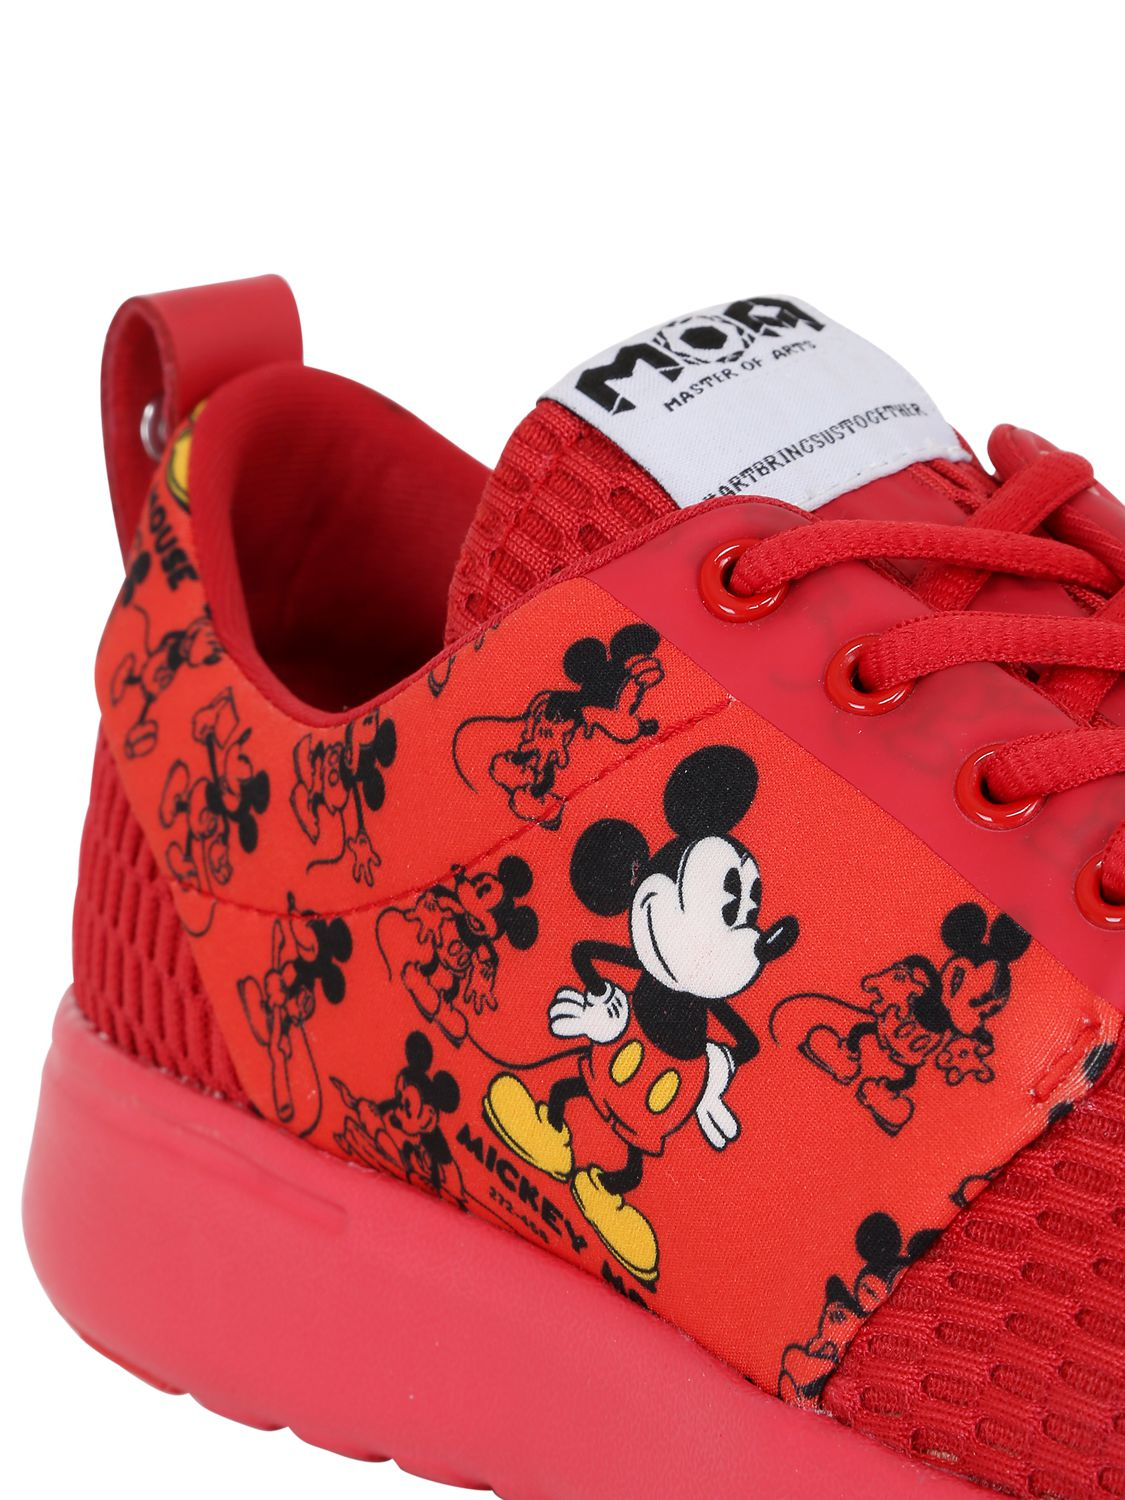 mens mickey mouse sneakers